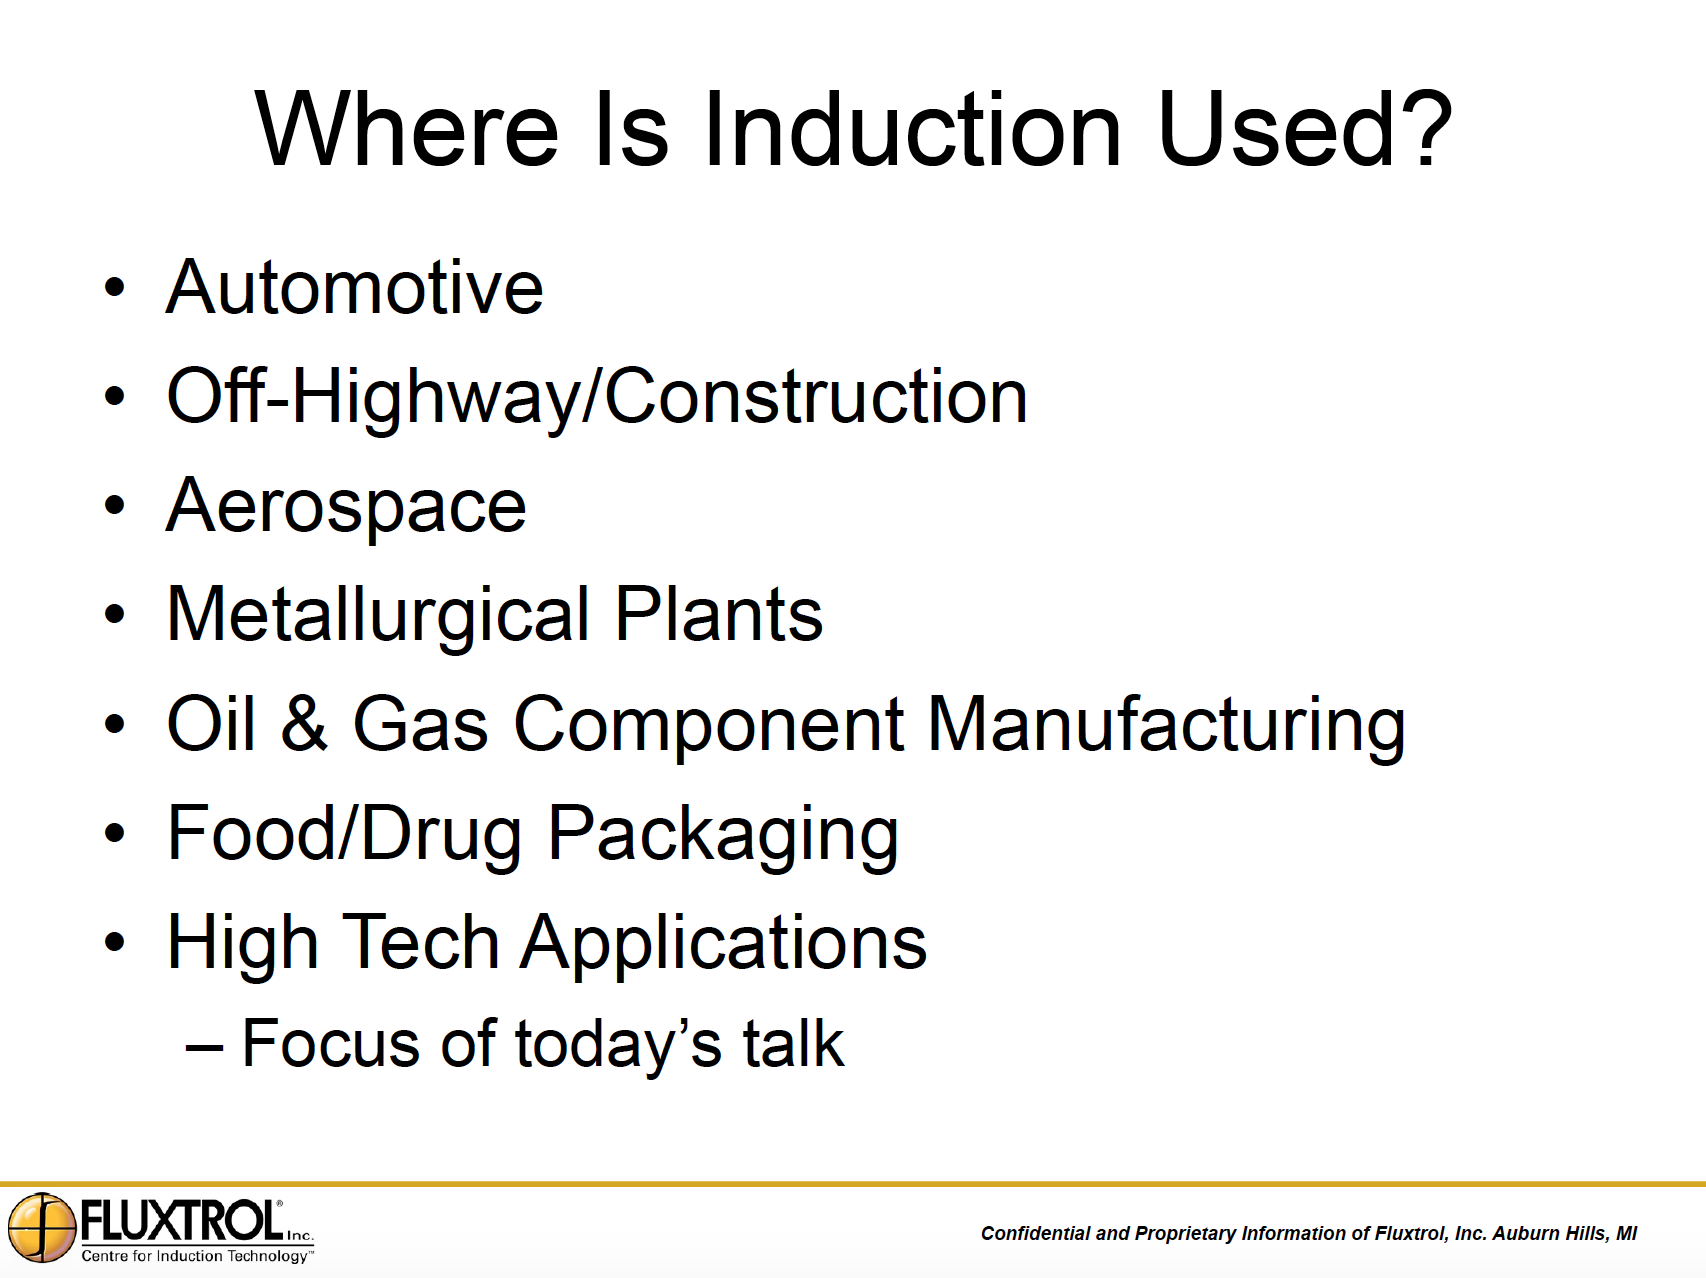 Fluxtrol | Applications of Induction Heating Enabling Advancement in Materials Science Figure 7 - Where is Induction Used?